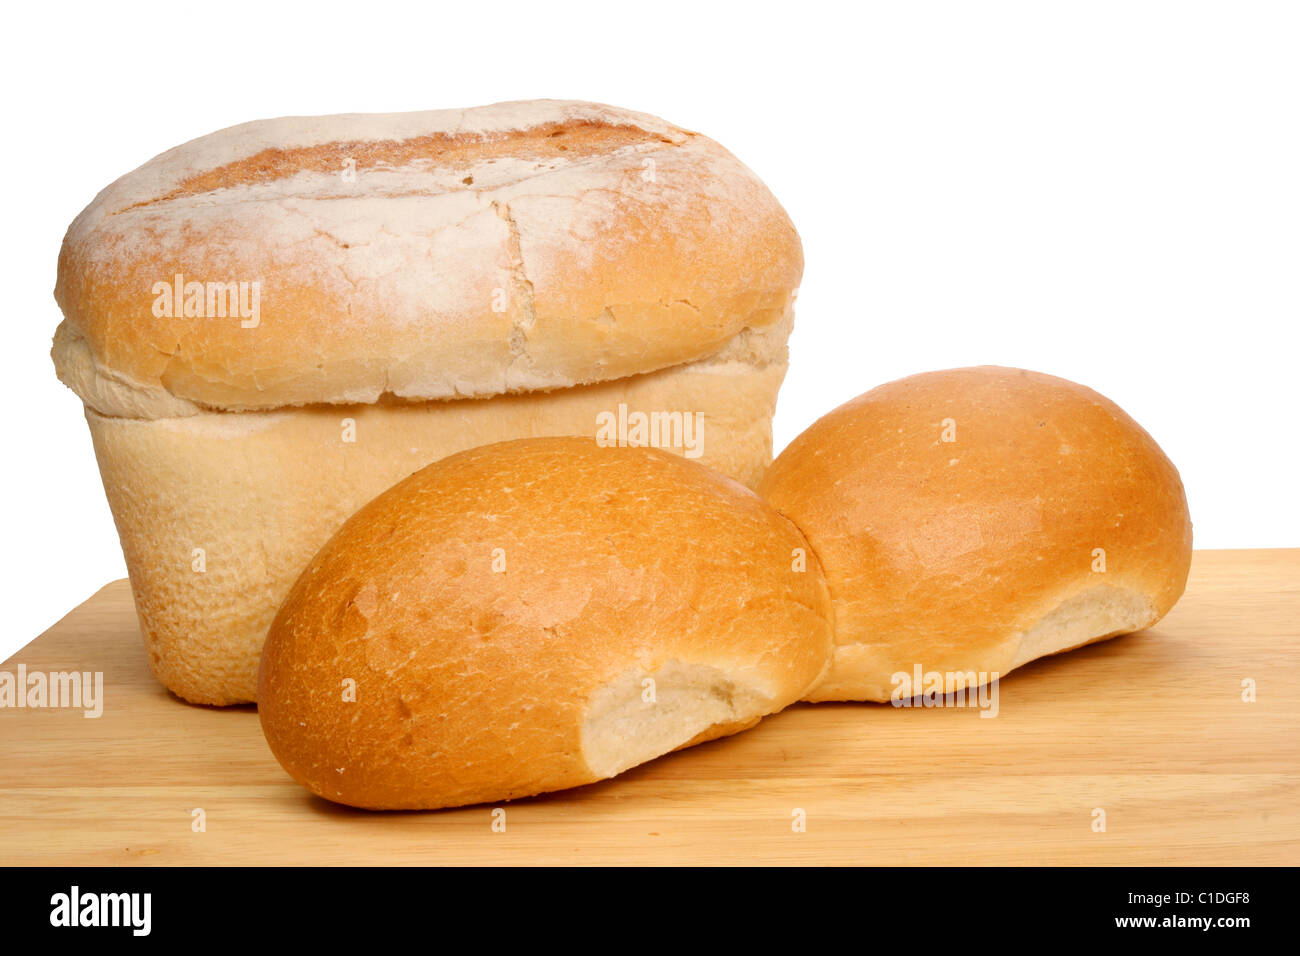 Bread loaf and rolls on wooden board Stock Photo